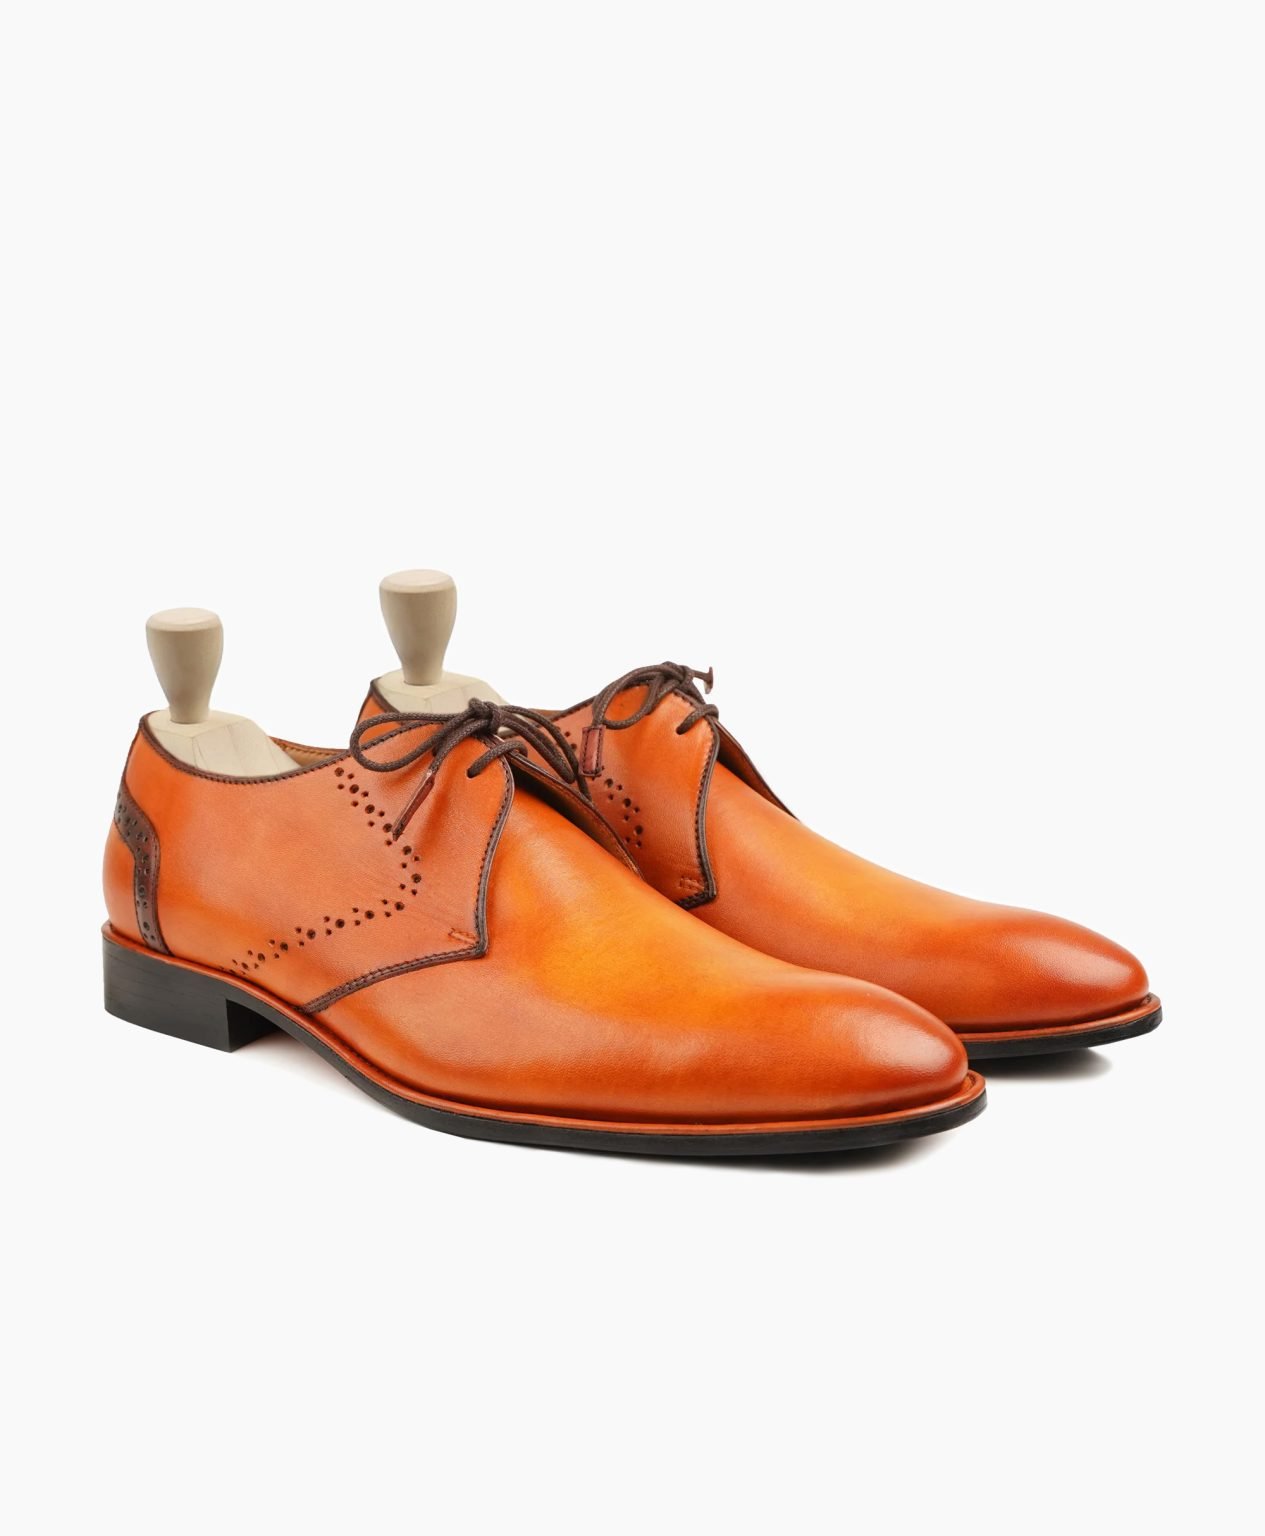 chesterfield-derby-tan-leather-shoes-image200